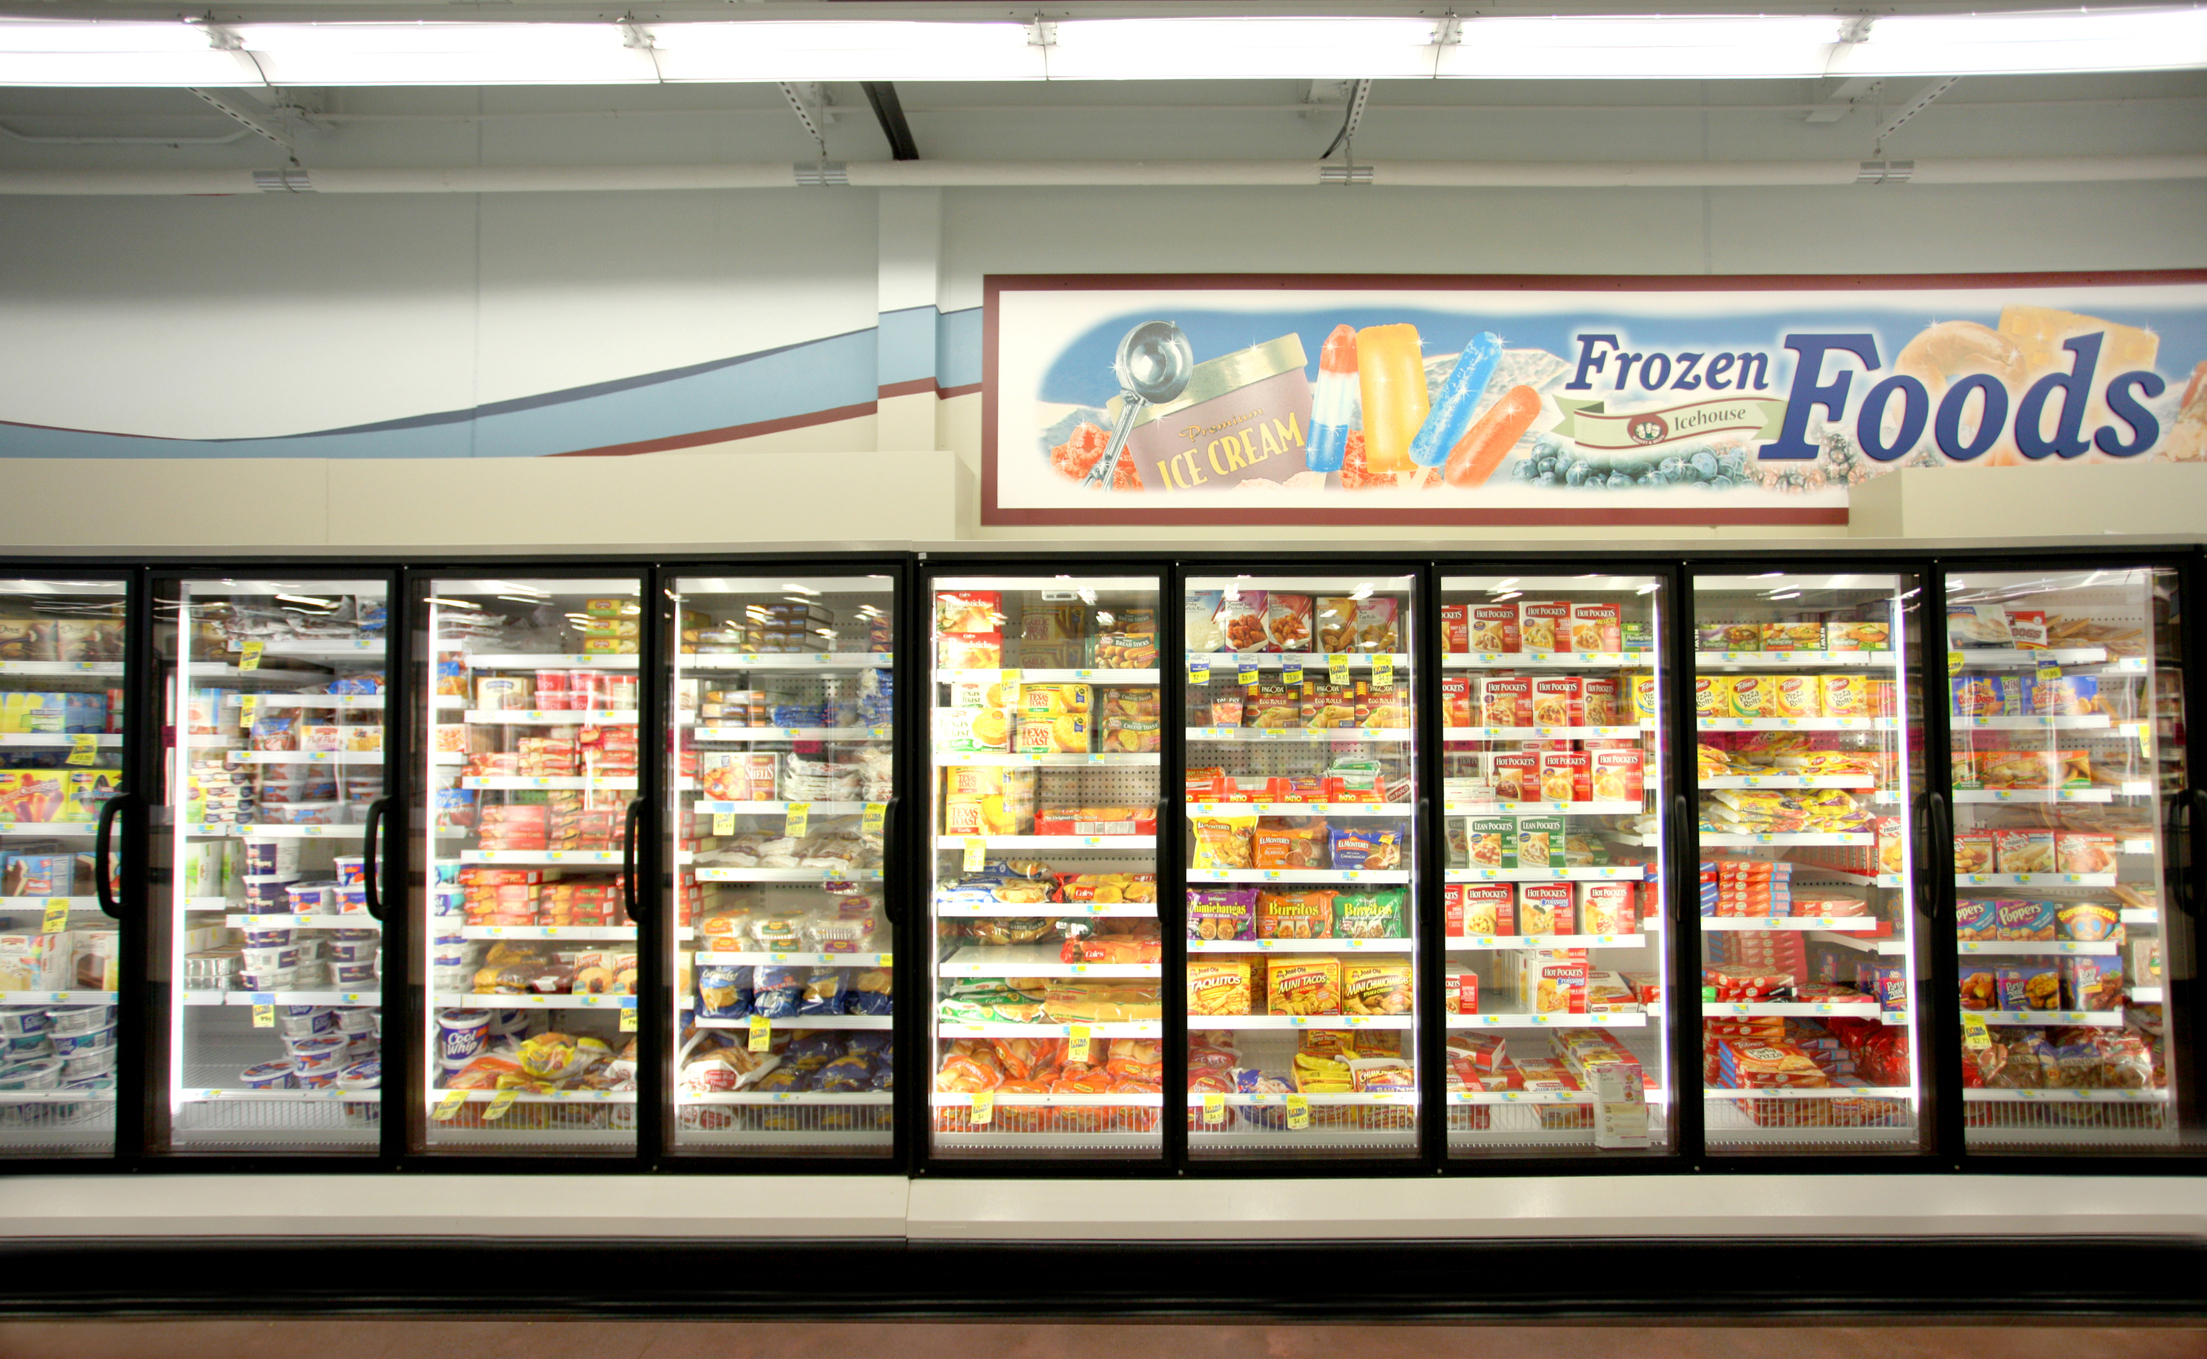 Aisle with a variety of frozen food items displayed in glass door freezers under a &quot;Frozen Foods&quot; sign